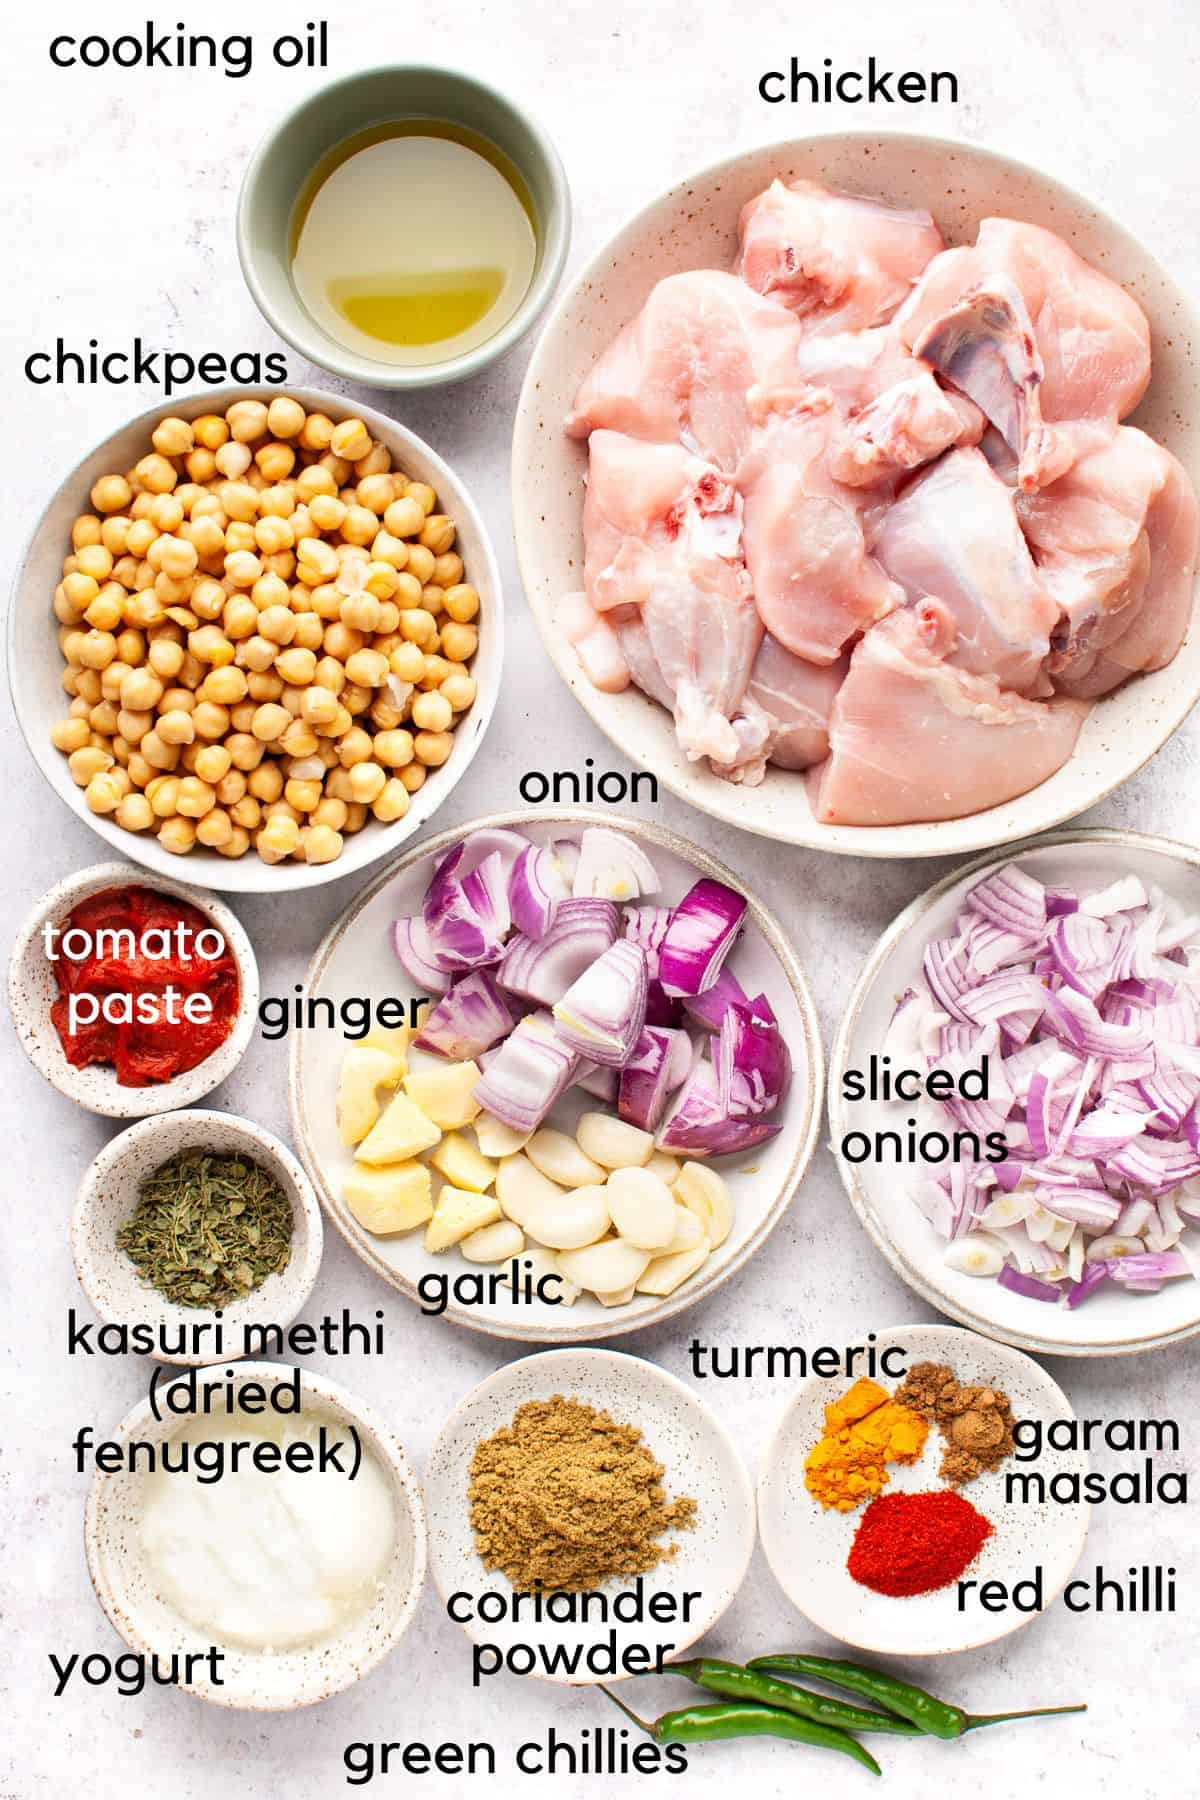 Murgh cholaylabelled ingredients.